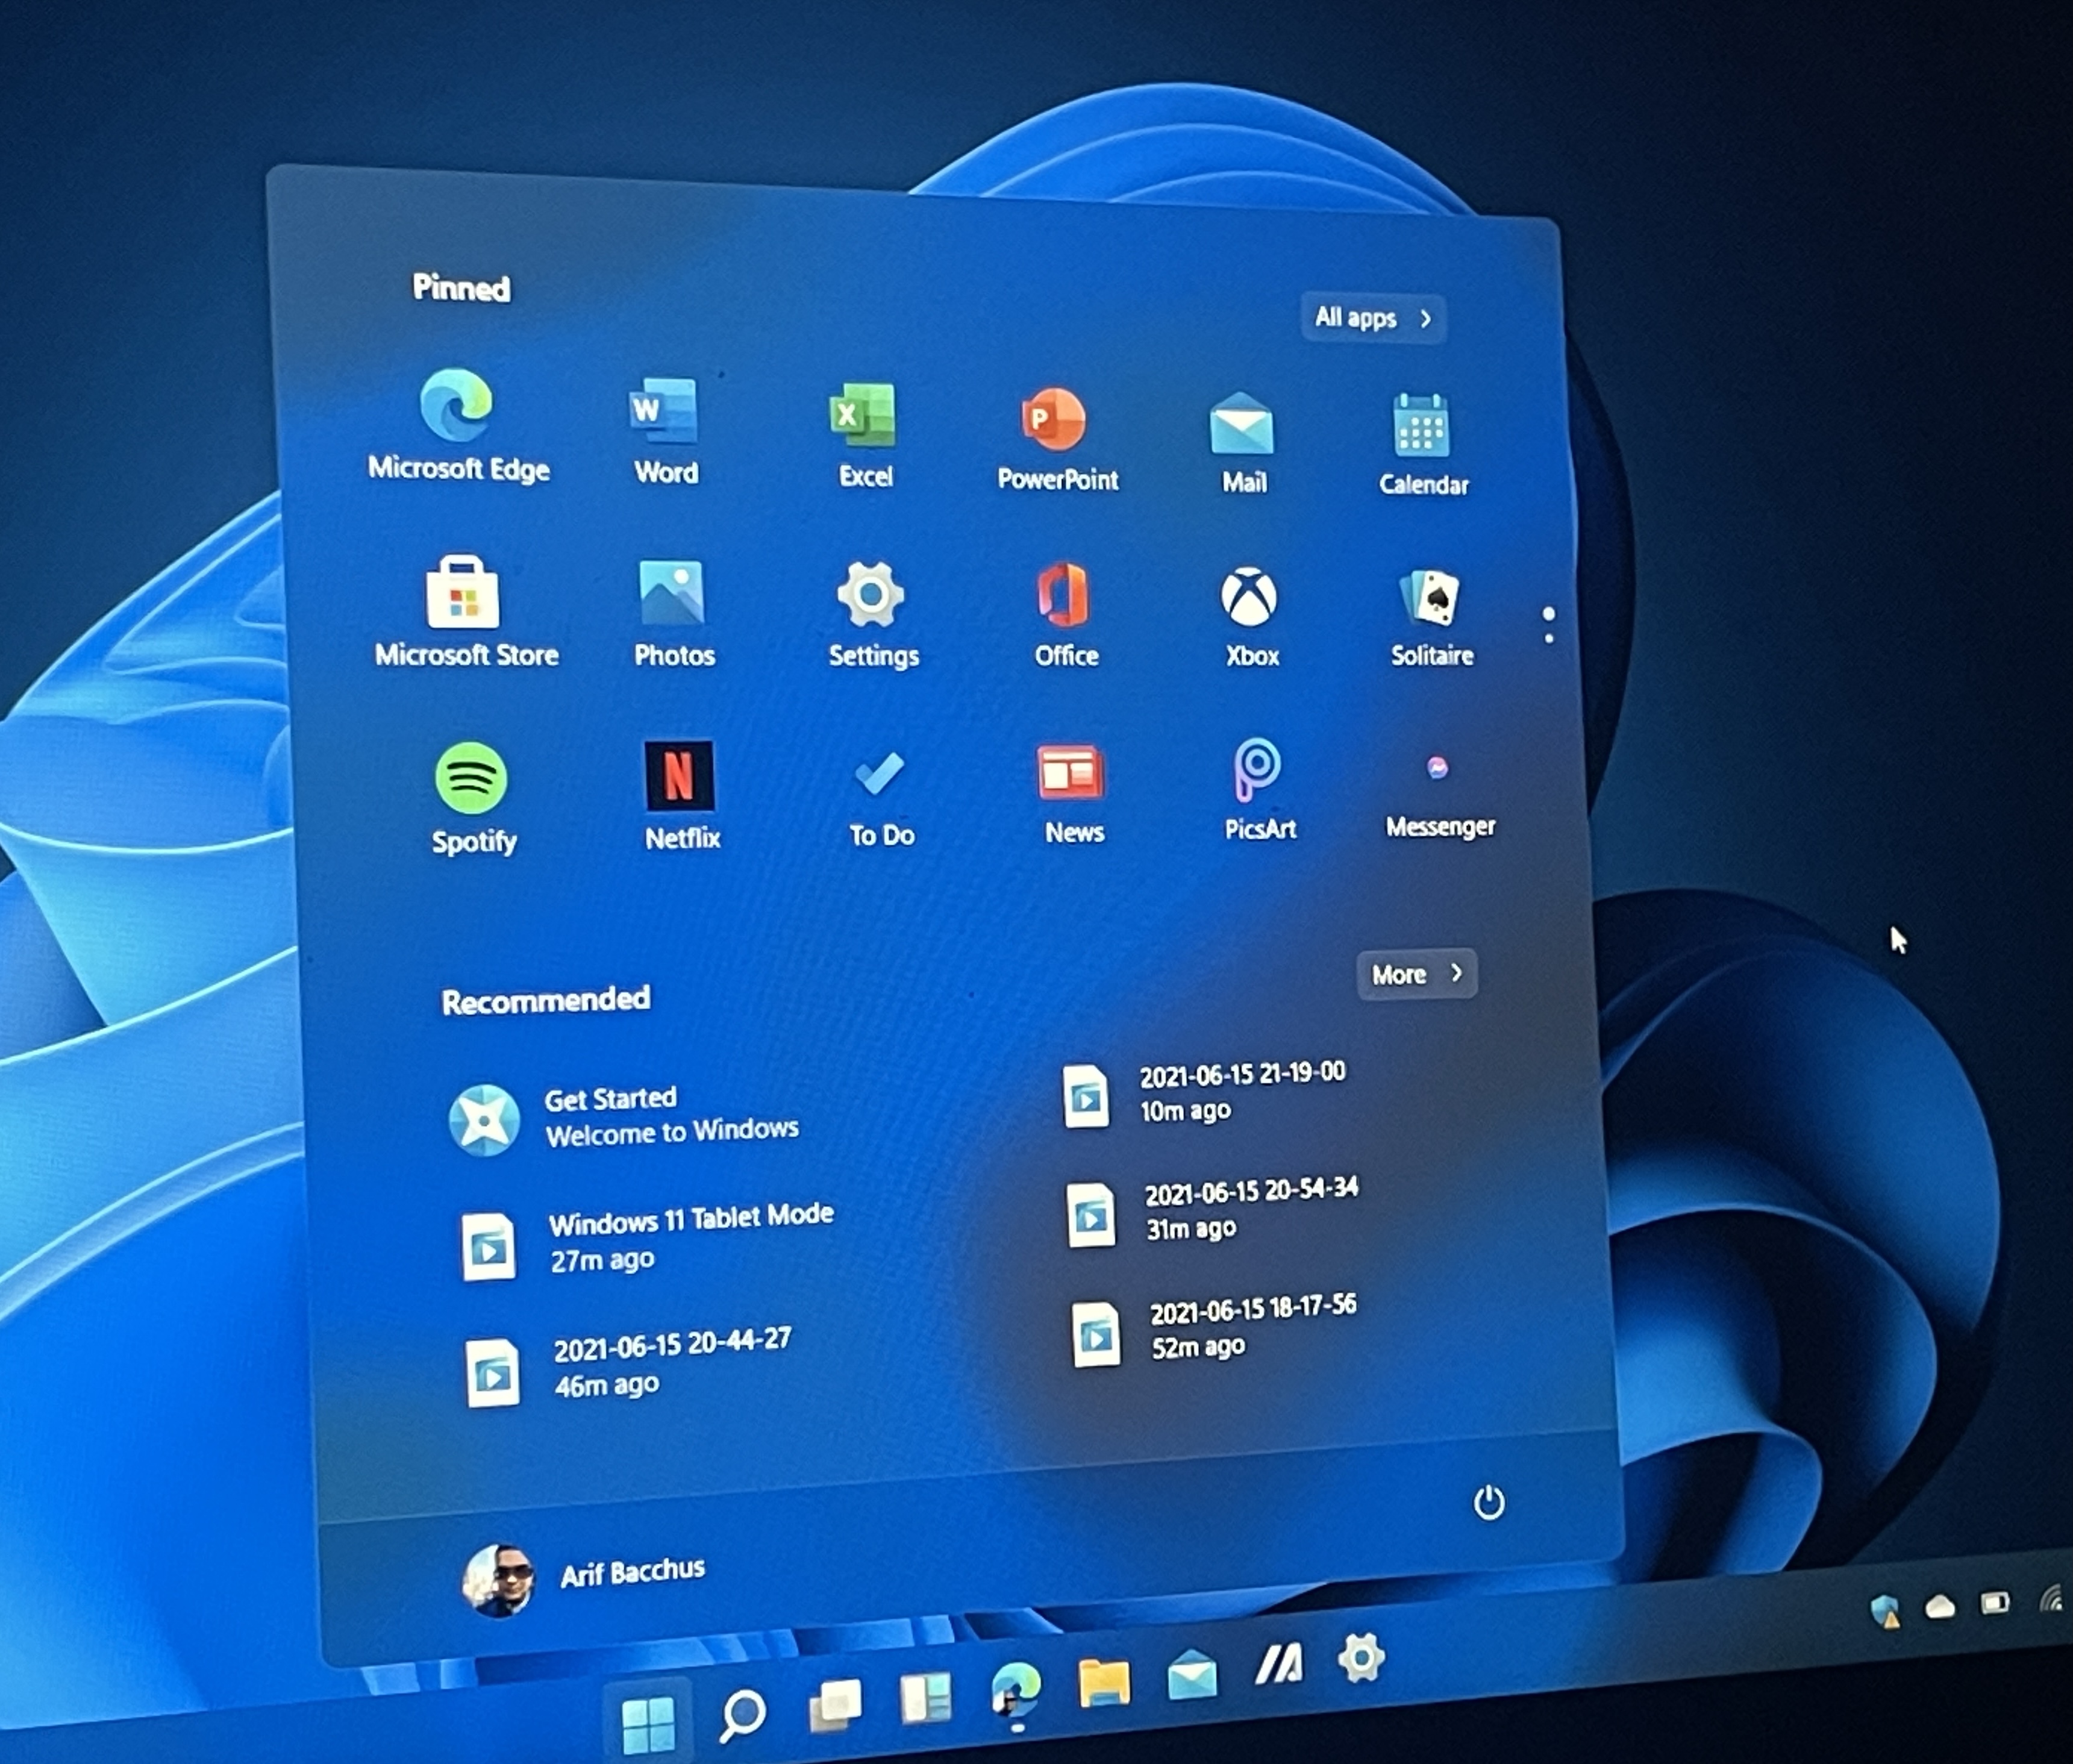 How to use Tablet mode in Windows 11